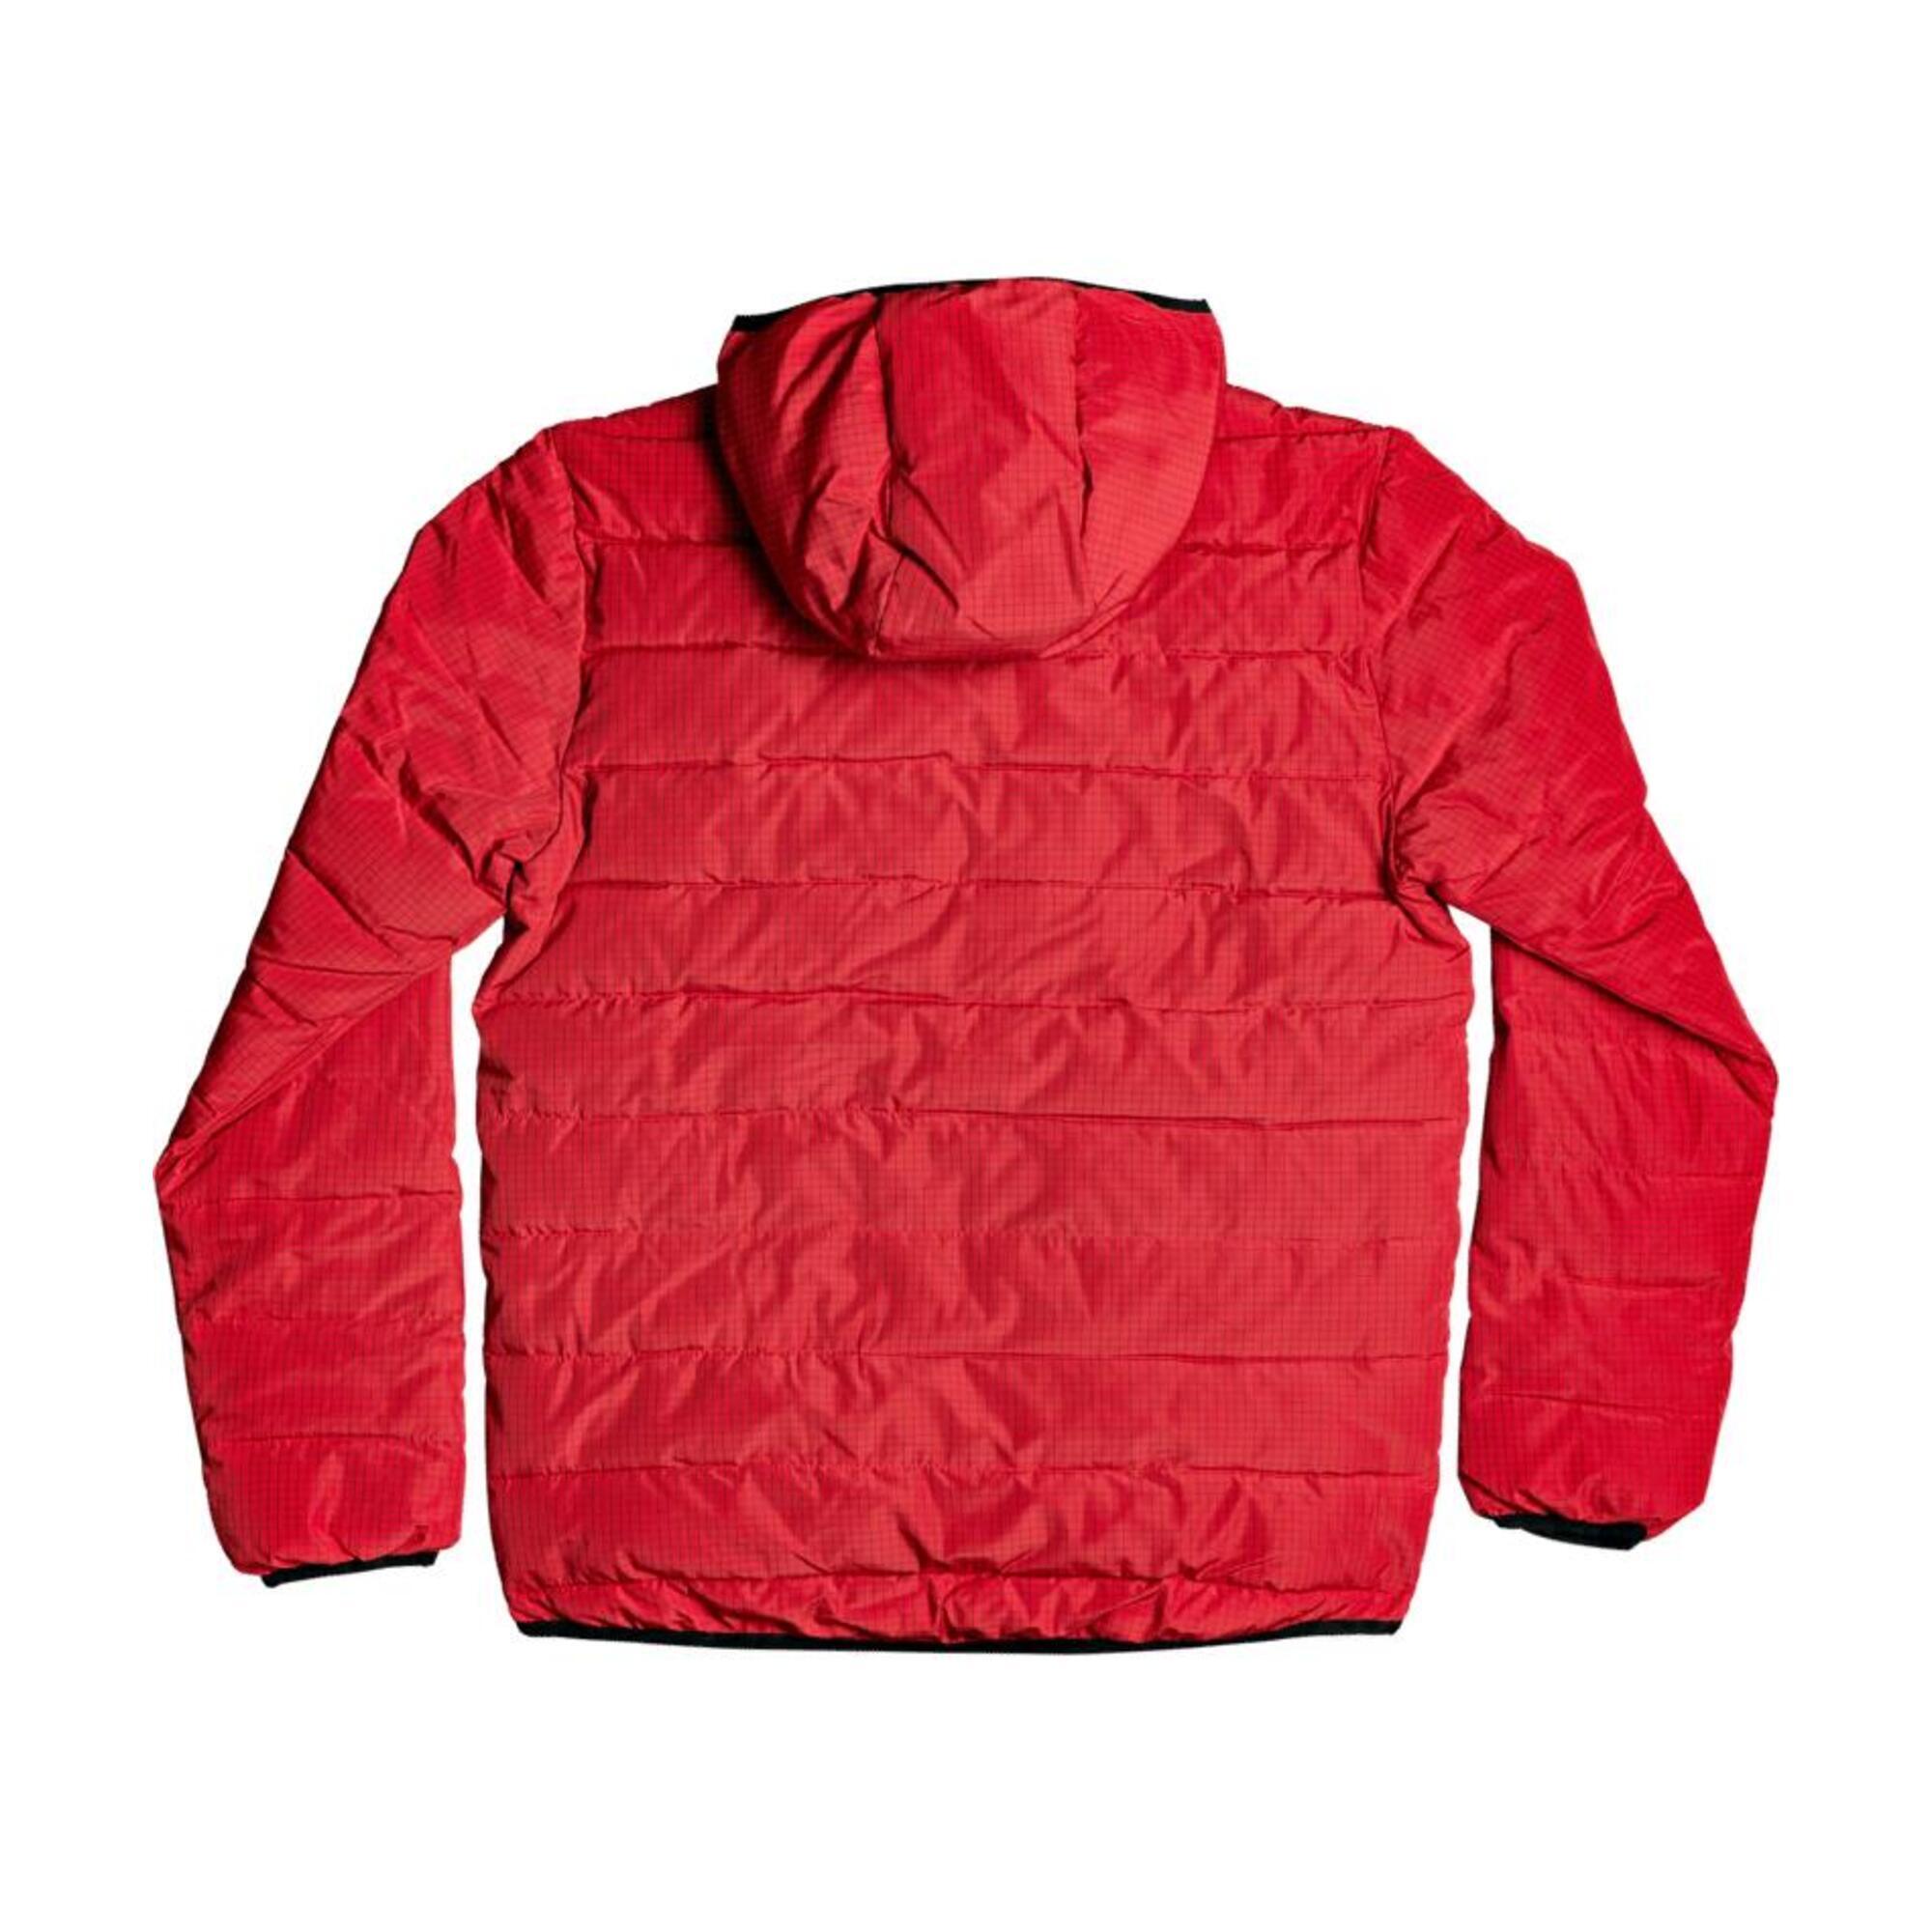 DC Shoes Turner Puffer Hooded, Rojo, M